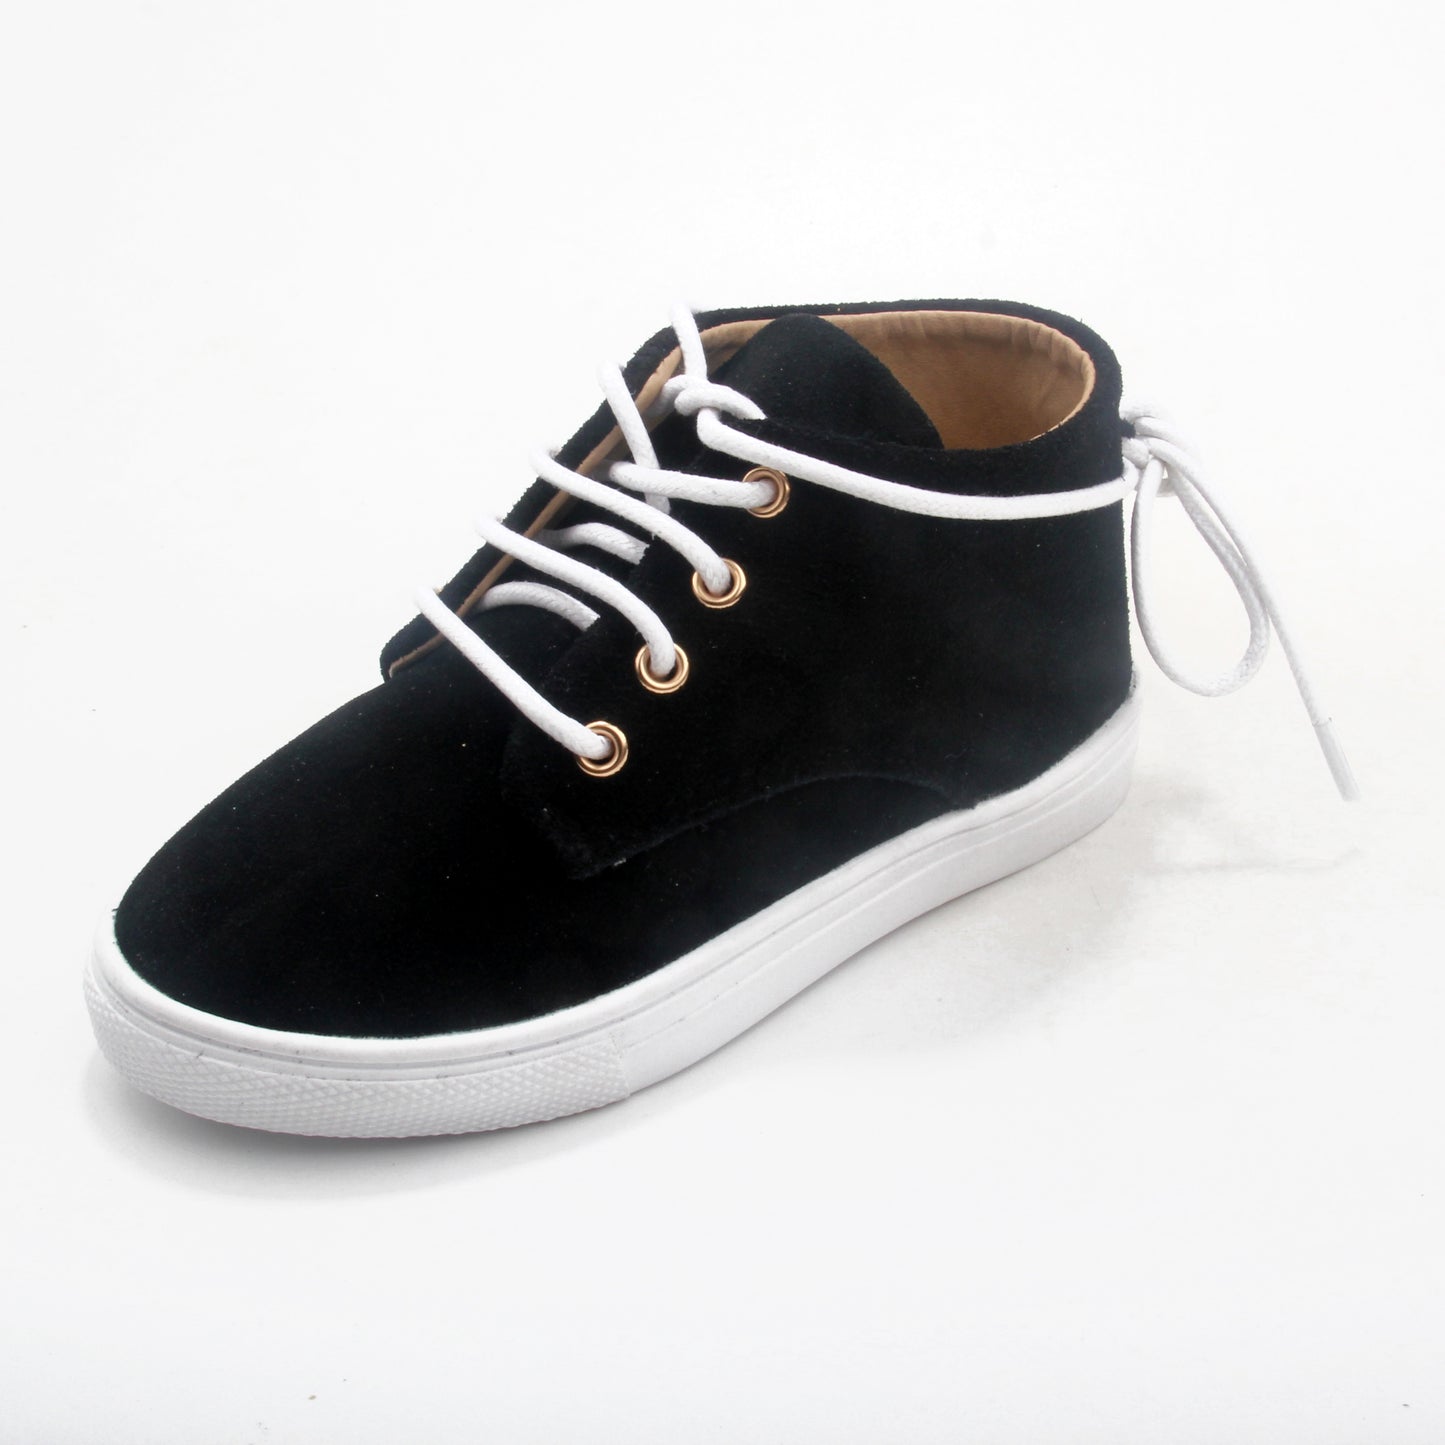 WILD CHASE - Black | Gelato Suede Leather Sneaker